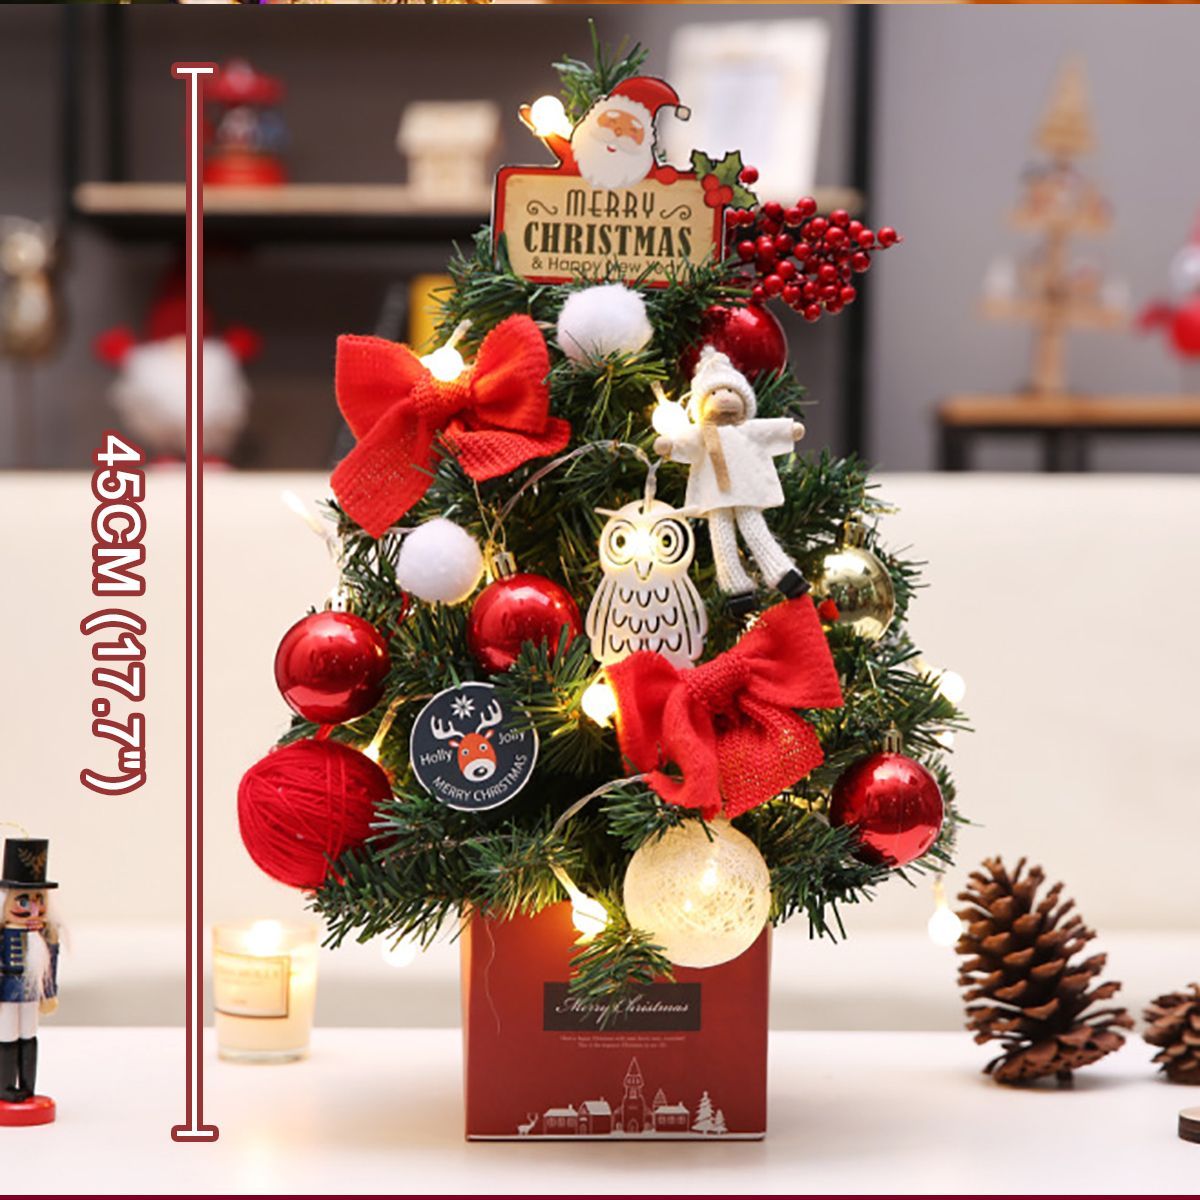 45CM-LED-Lights-Artificial-Small-Christmas-Tree-String-Ornaments-for-Christmas-Party-Decoration-Supp-1583523